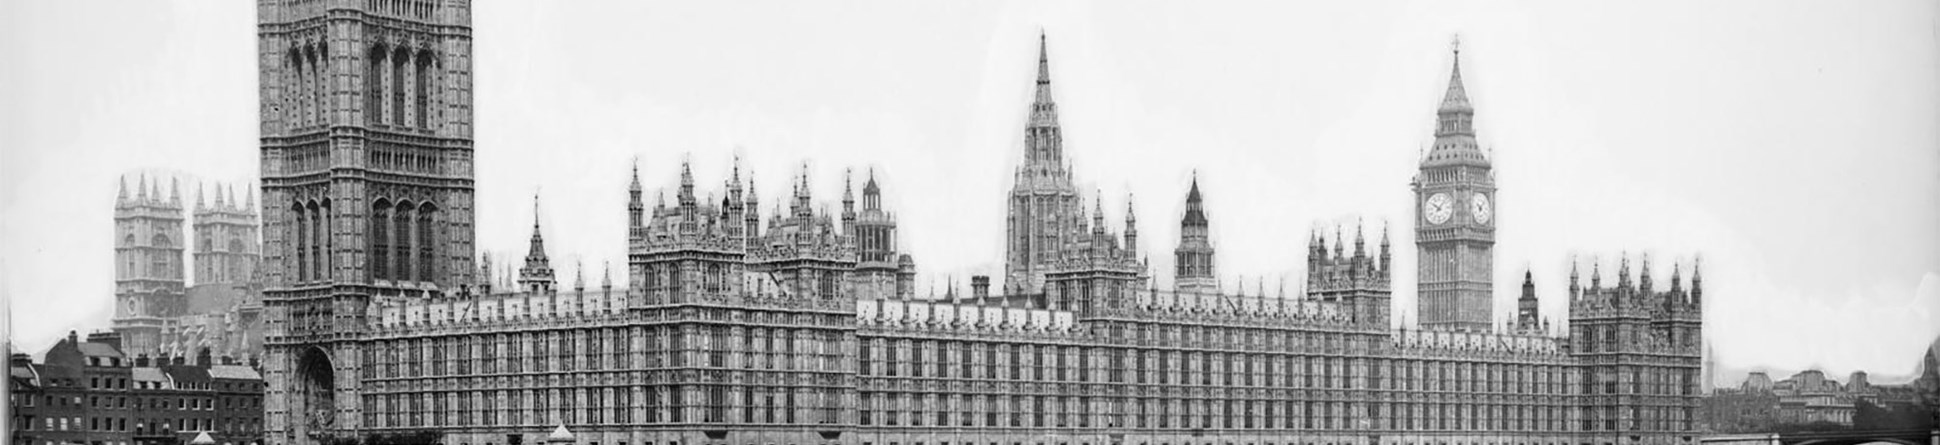 A view of the Houses of Parliament from Lambeth